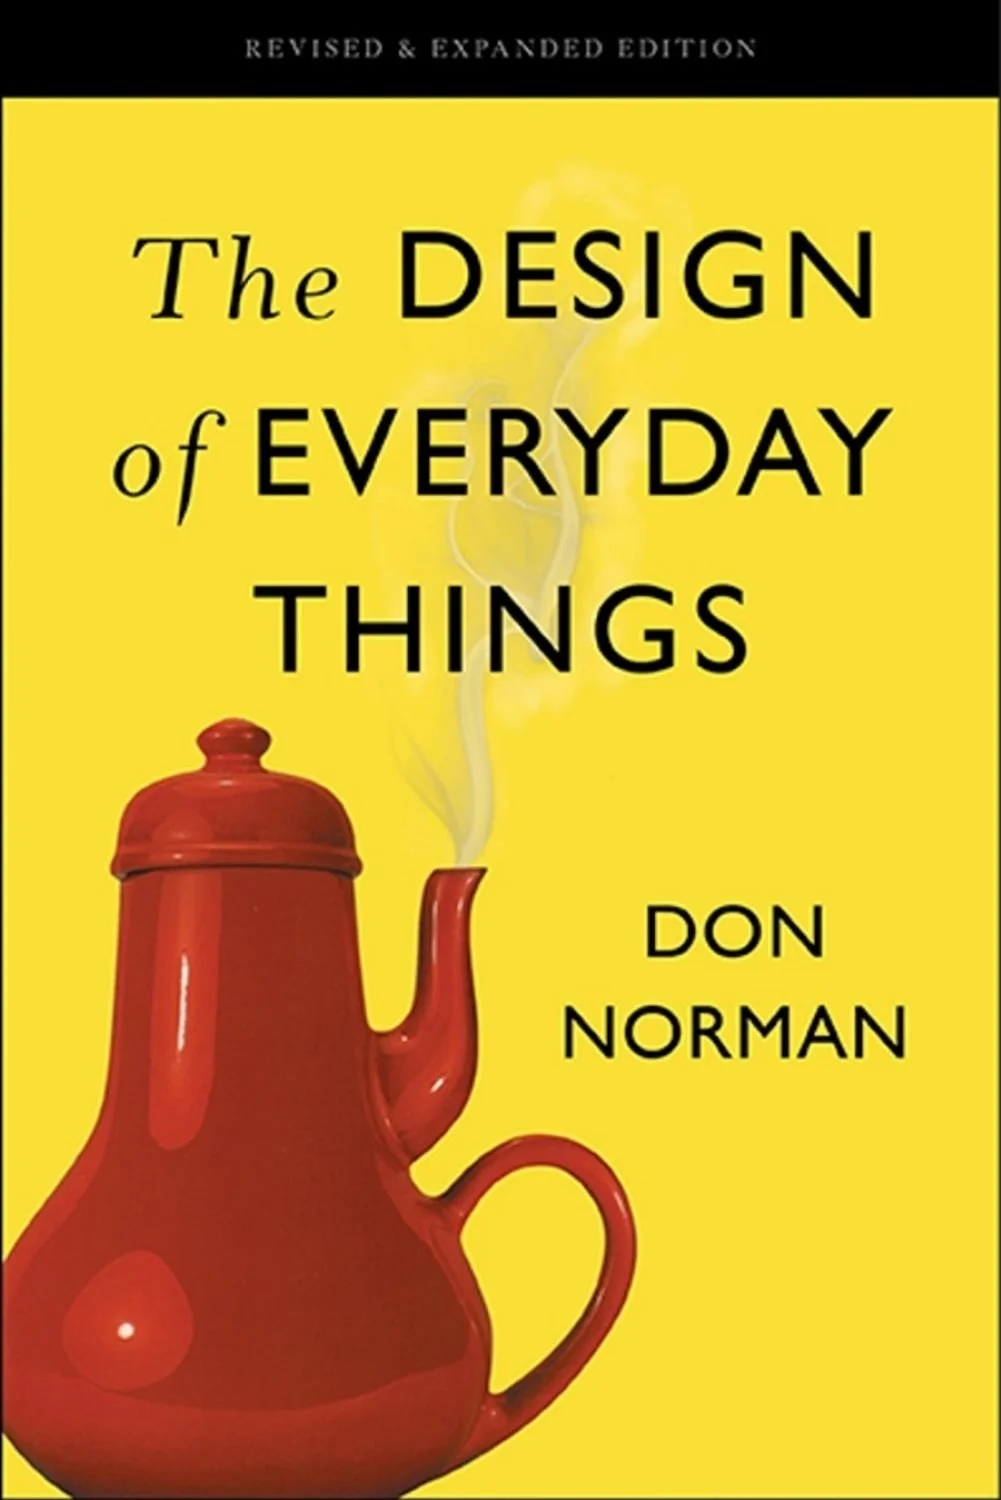 Cover of the book "The Design of Everyday Things"